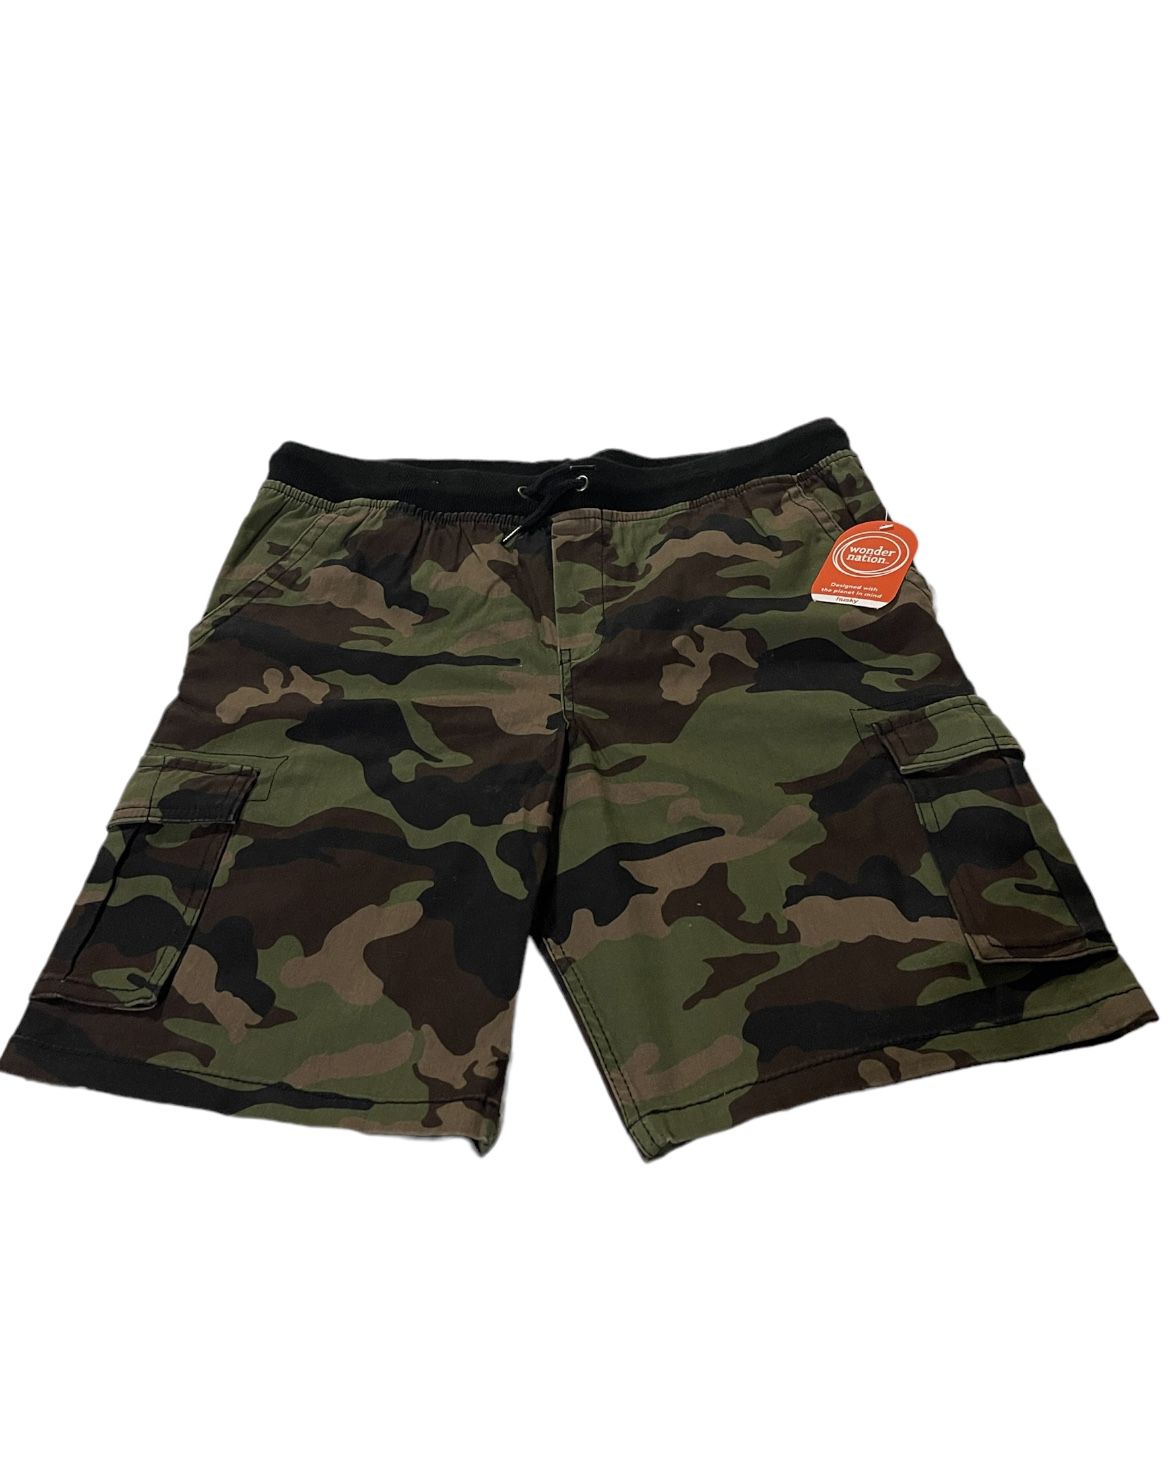 Kids Short Elastic Camouflage Shorts Classic Fit Casual Jogger Gym Size XL Husky